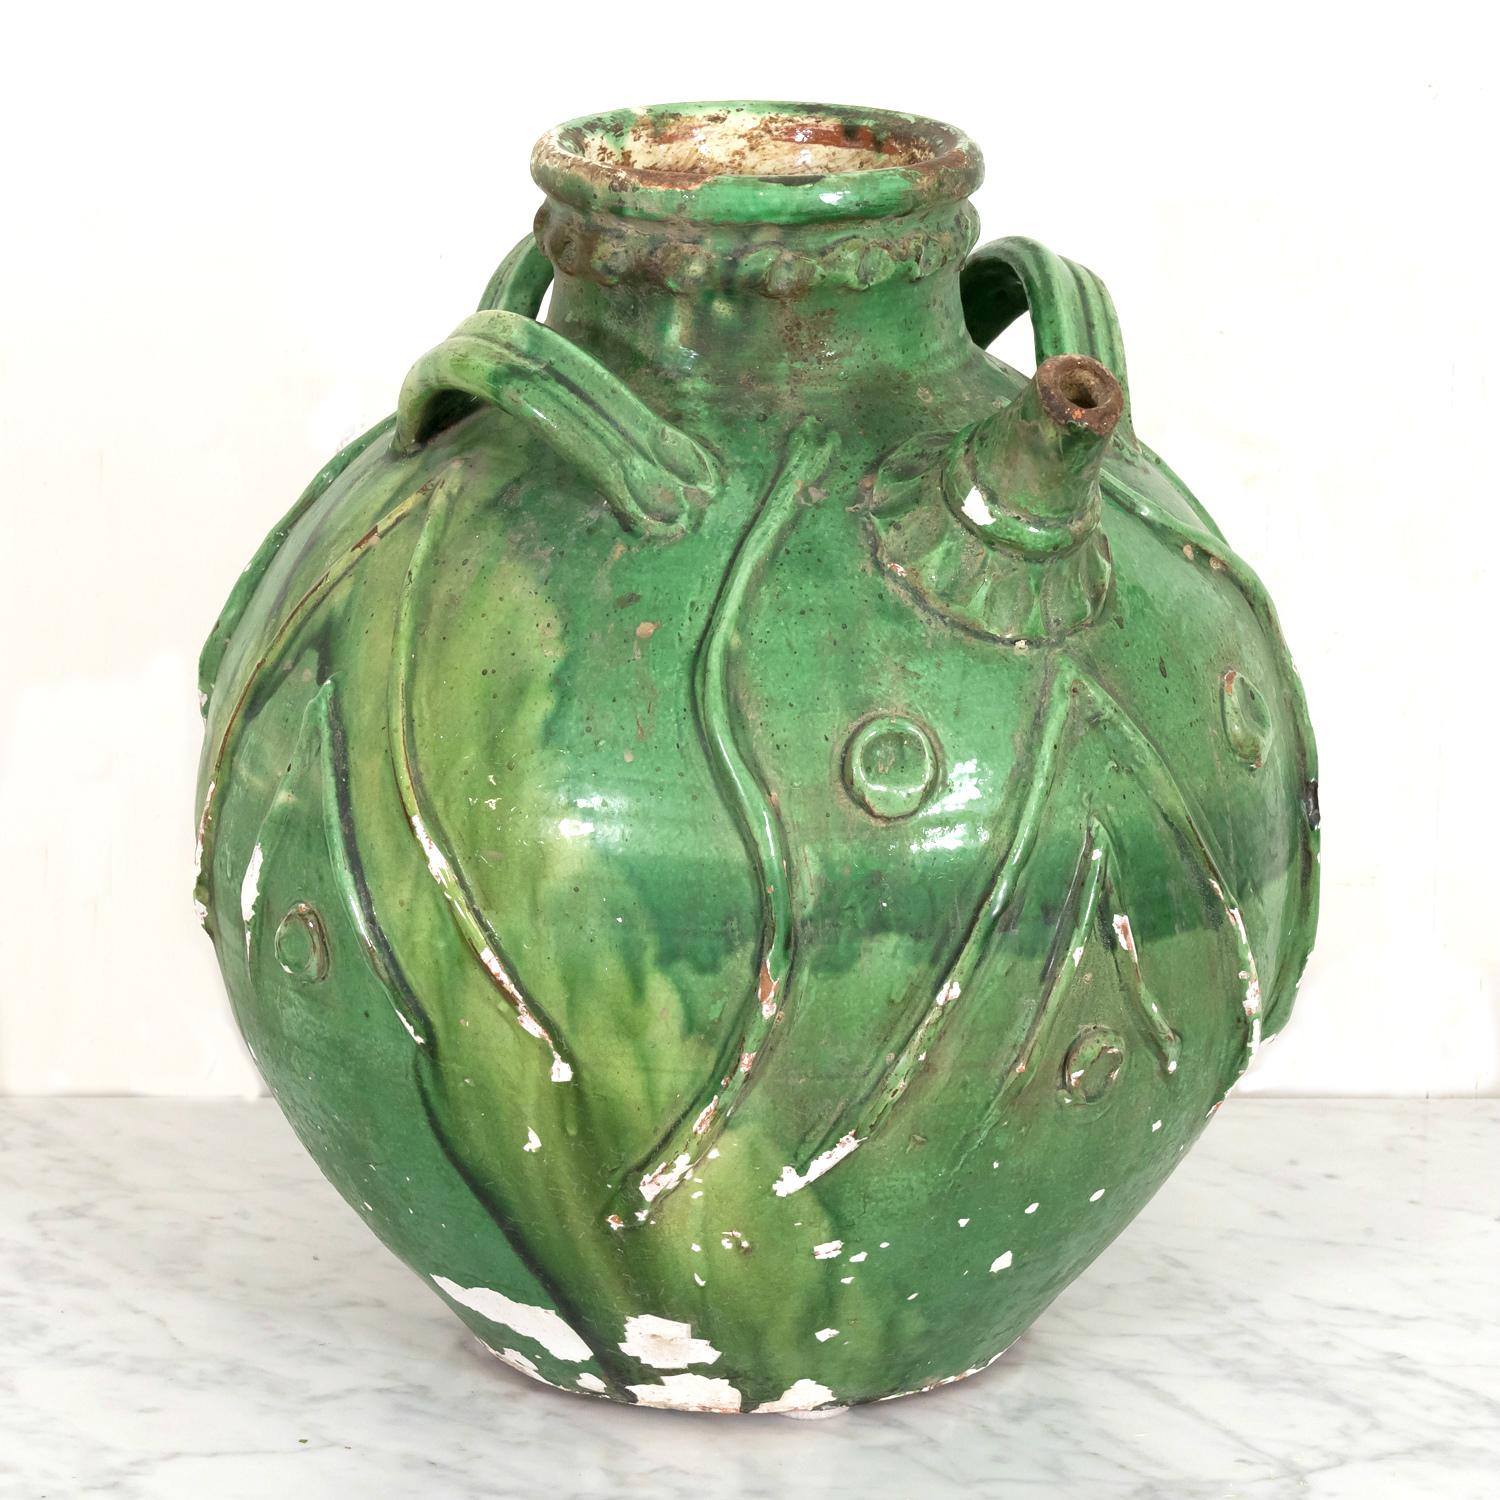 Earthenware Exceptional Early 19th Century French Glazed Terracotta Walnut Oil Jug For Sale